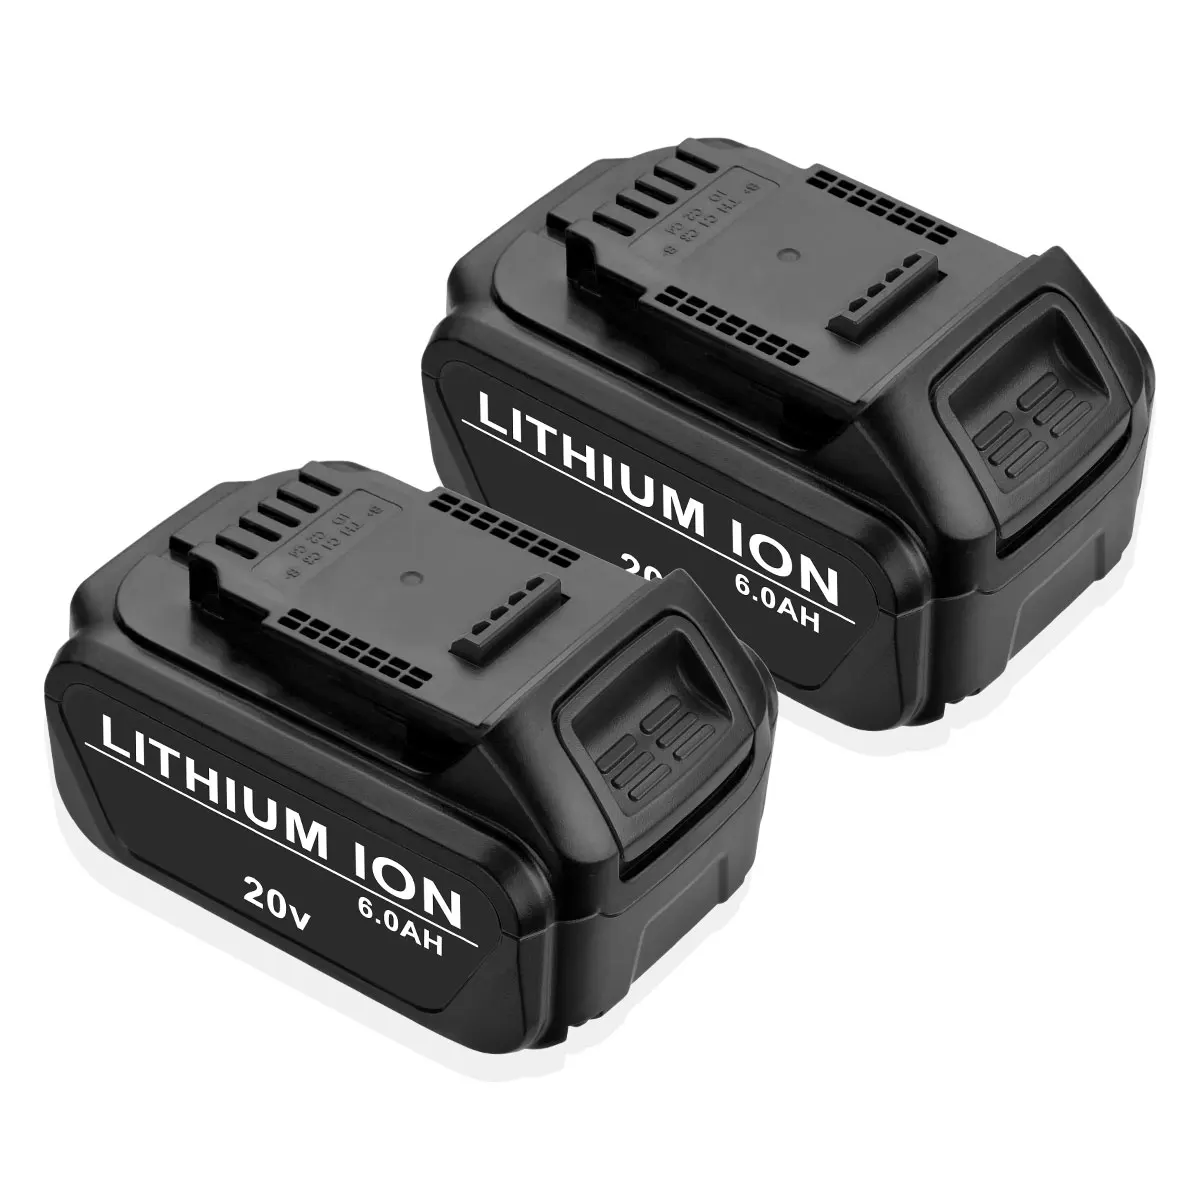 High Capacity 6Ah 20V Li-Ion Battery With Led Indicator Dcb205 20 Volt Battery For 20 Volt Cordless Power Tools